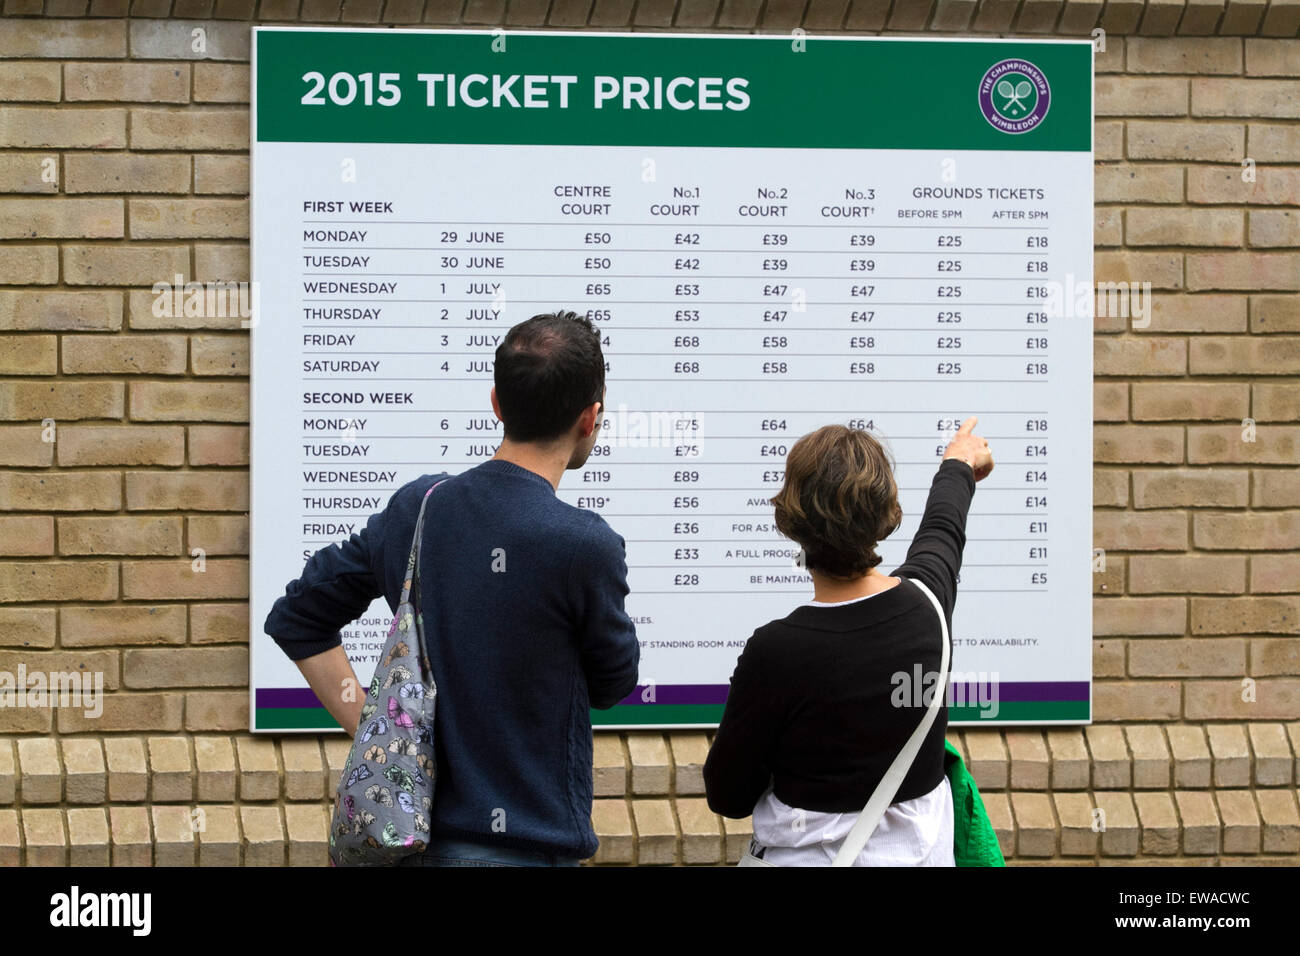 Wumbledon London, UK. 21st June 2015. People look at a board showing the various ticket prices for the 2015 Wimbledon Tennis Championships Credit:  amer ghazzal/Alamy Live News Stock Photo